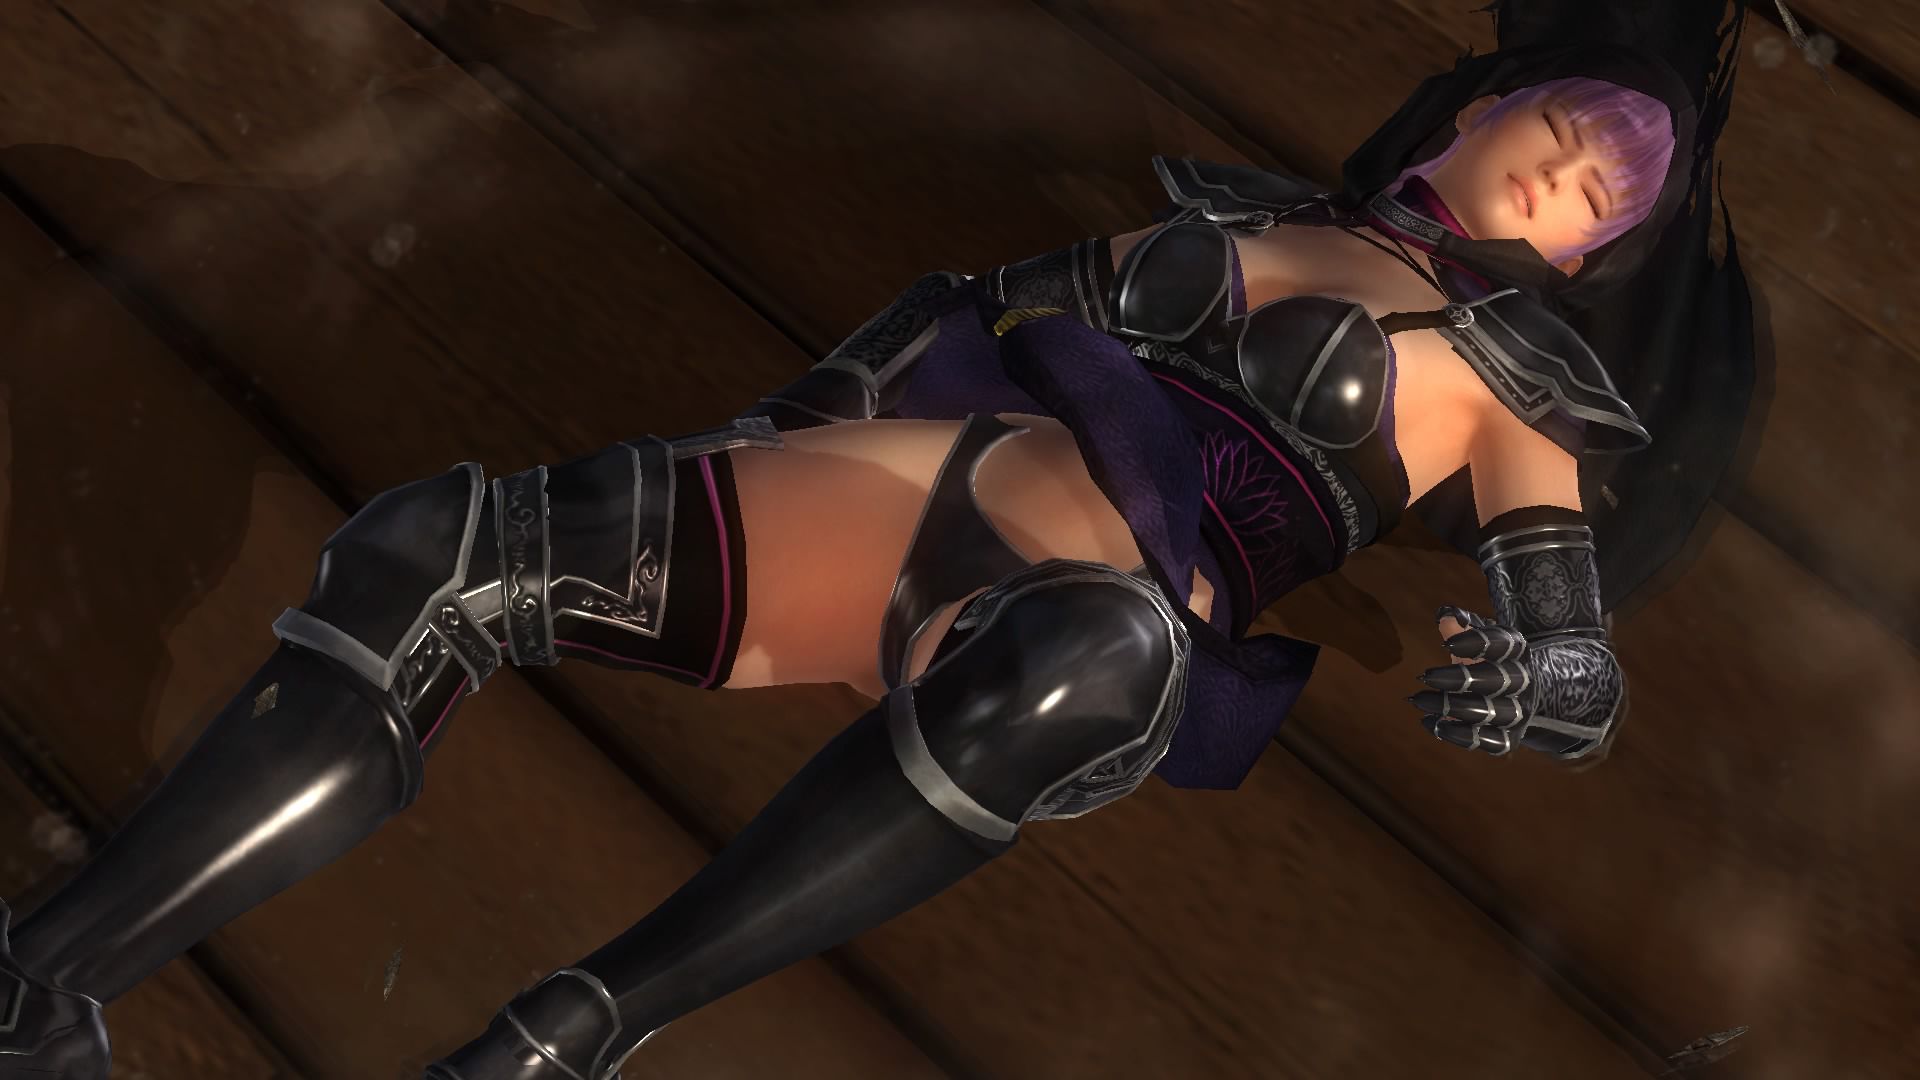 DOA5LR ayane (everyone's Halloween by 2015) to Hitomi and Lisa Tagme throwing at ryona 35